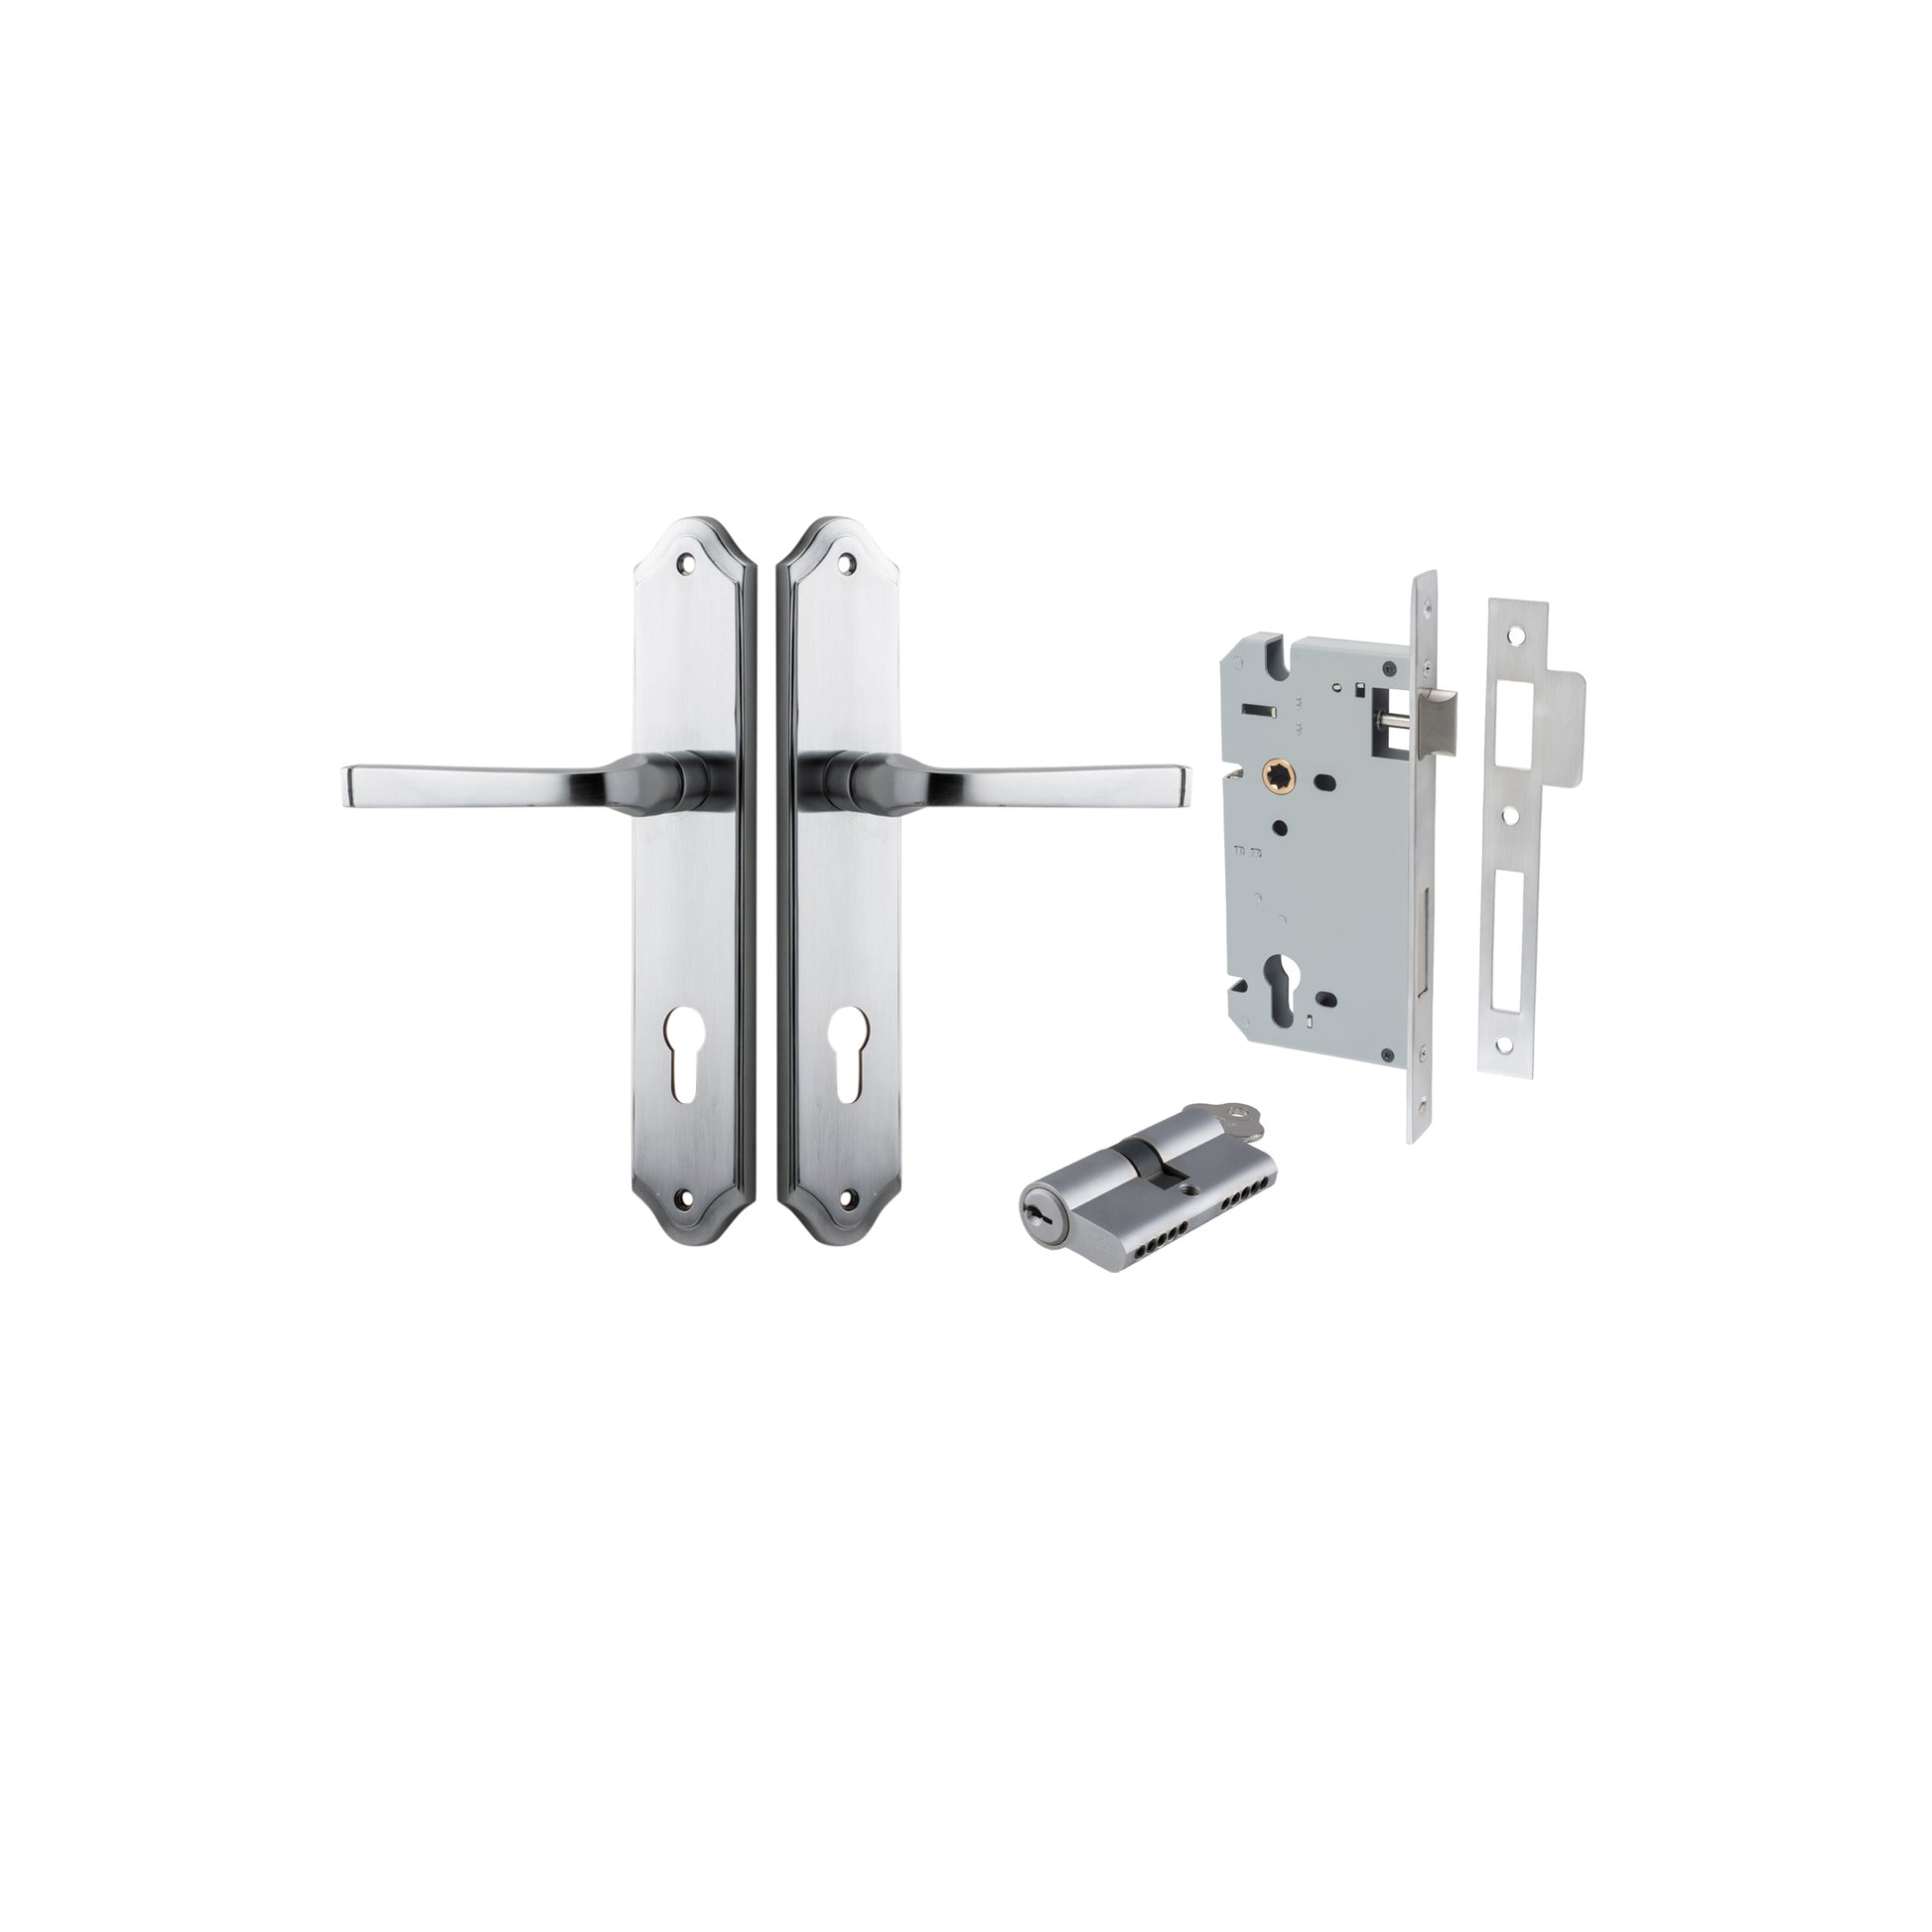 Door Lever Annecy Shouldered Euro Brushed Chrome CTC85mm H240xW50xP65mm Entrance Kit, Mortice Lock Euro Brushed Chrome CTC85mm Backset 60mm, Euro Cylinder Dual Function 5 Pin Brushed Chrome L65mm KA1 in Brushed Chrome